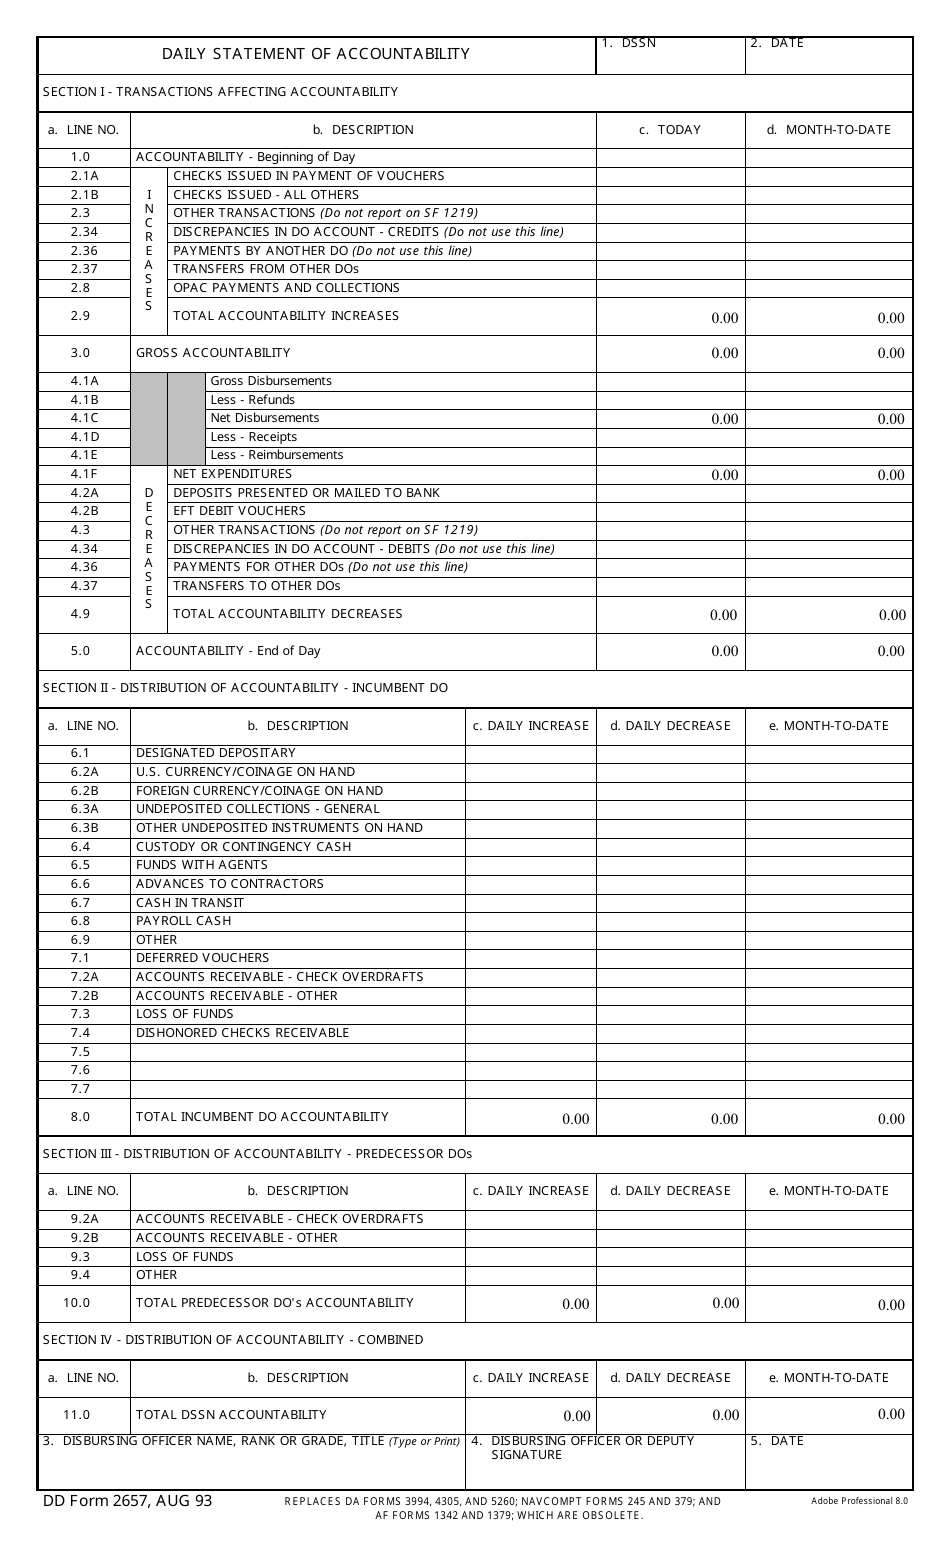 DD Form 2657 Daily Statement of Accountability, Page 1